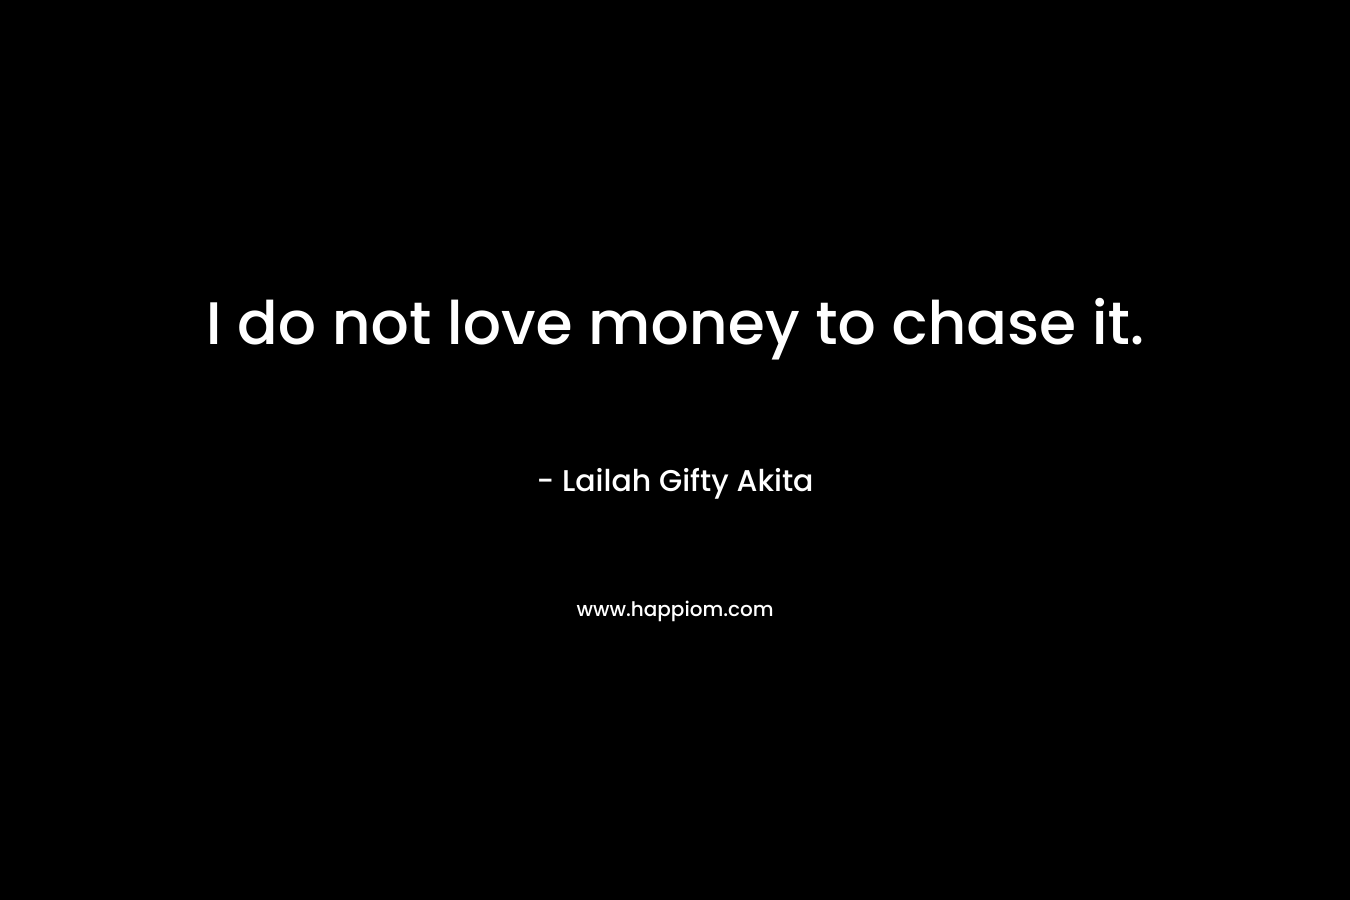 I do not love money to chase it.